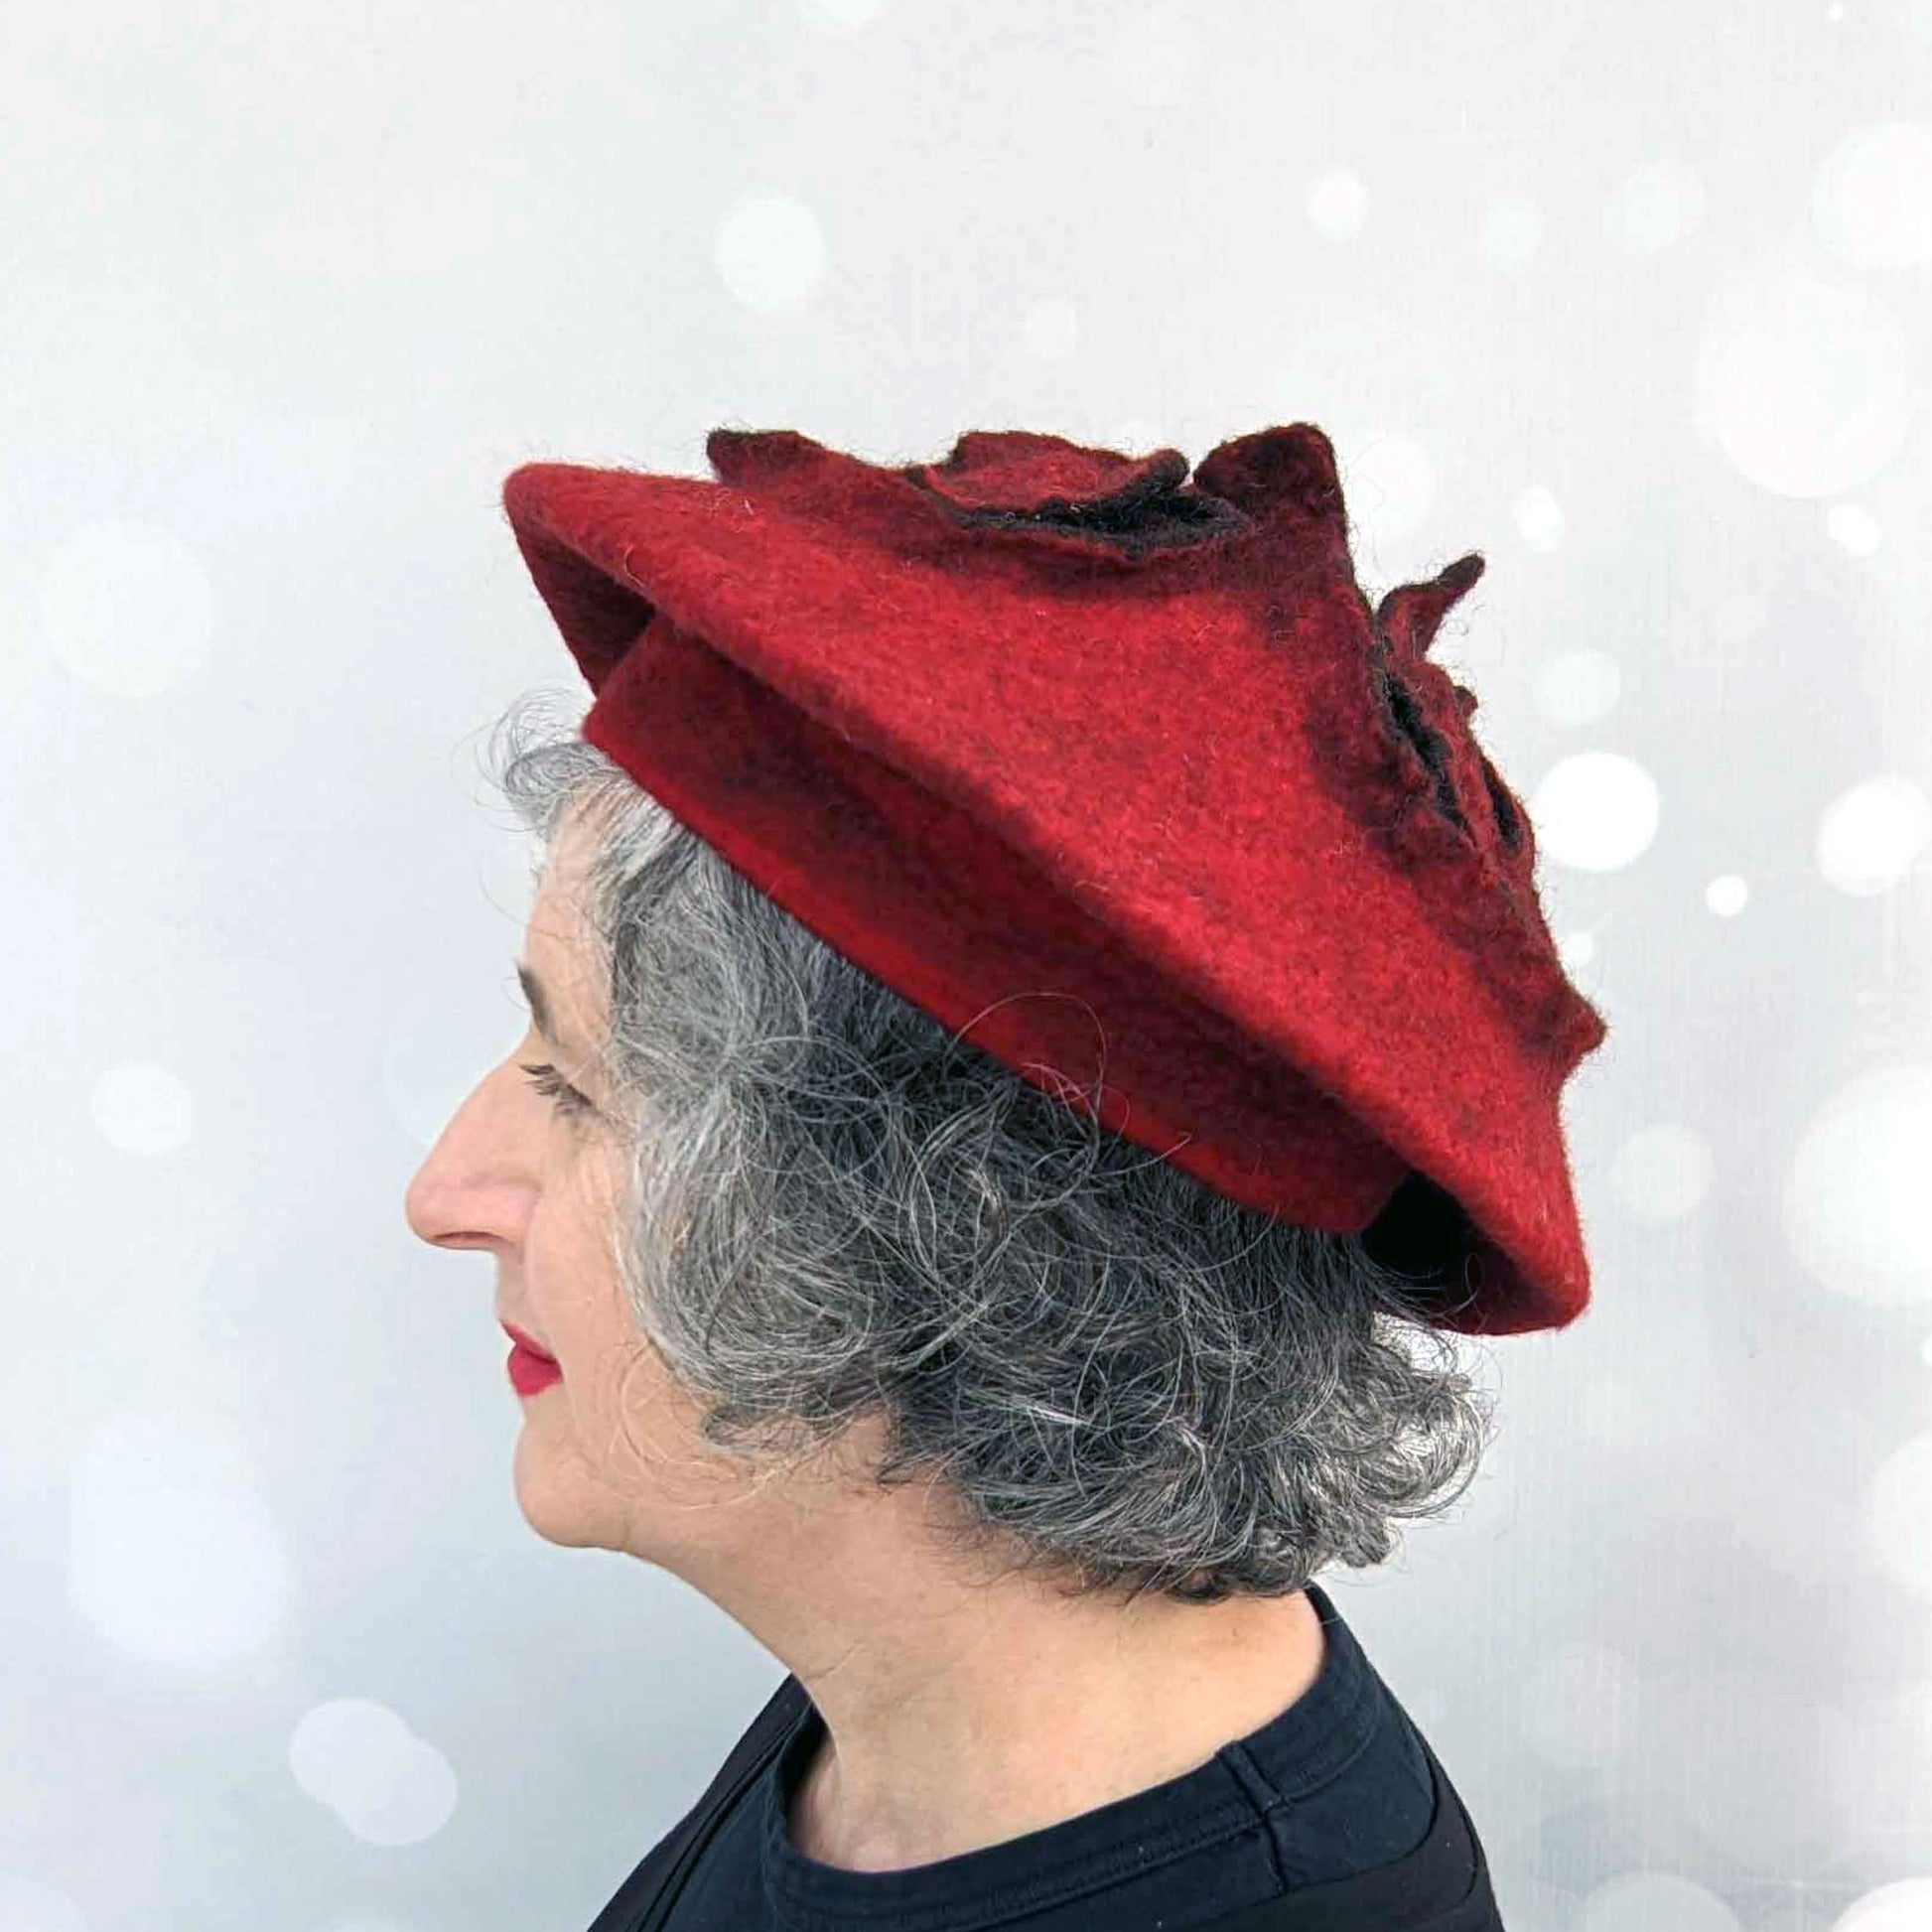 Felted Red Beret with Triskele Motif - side view